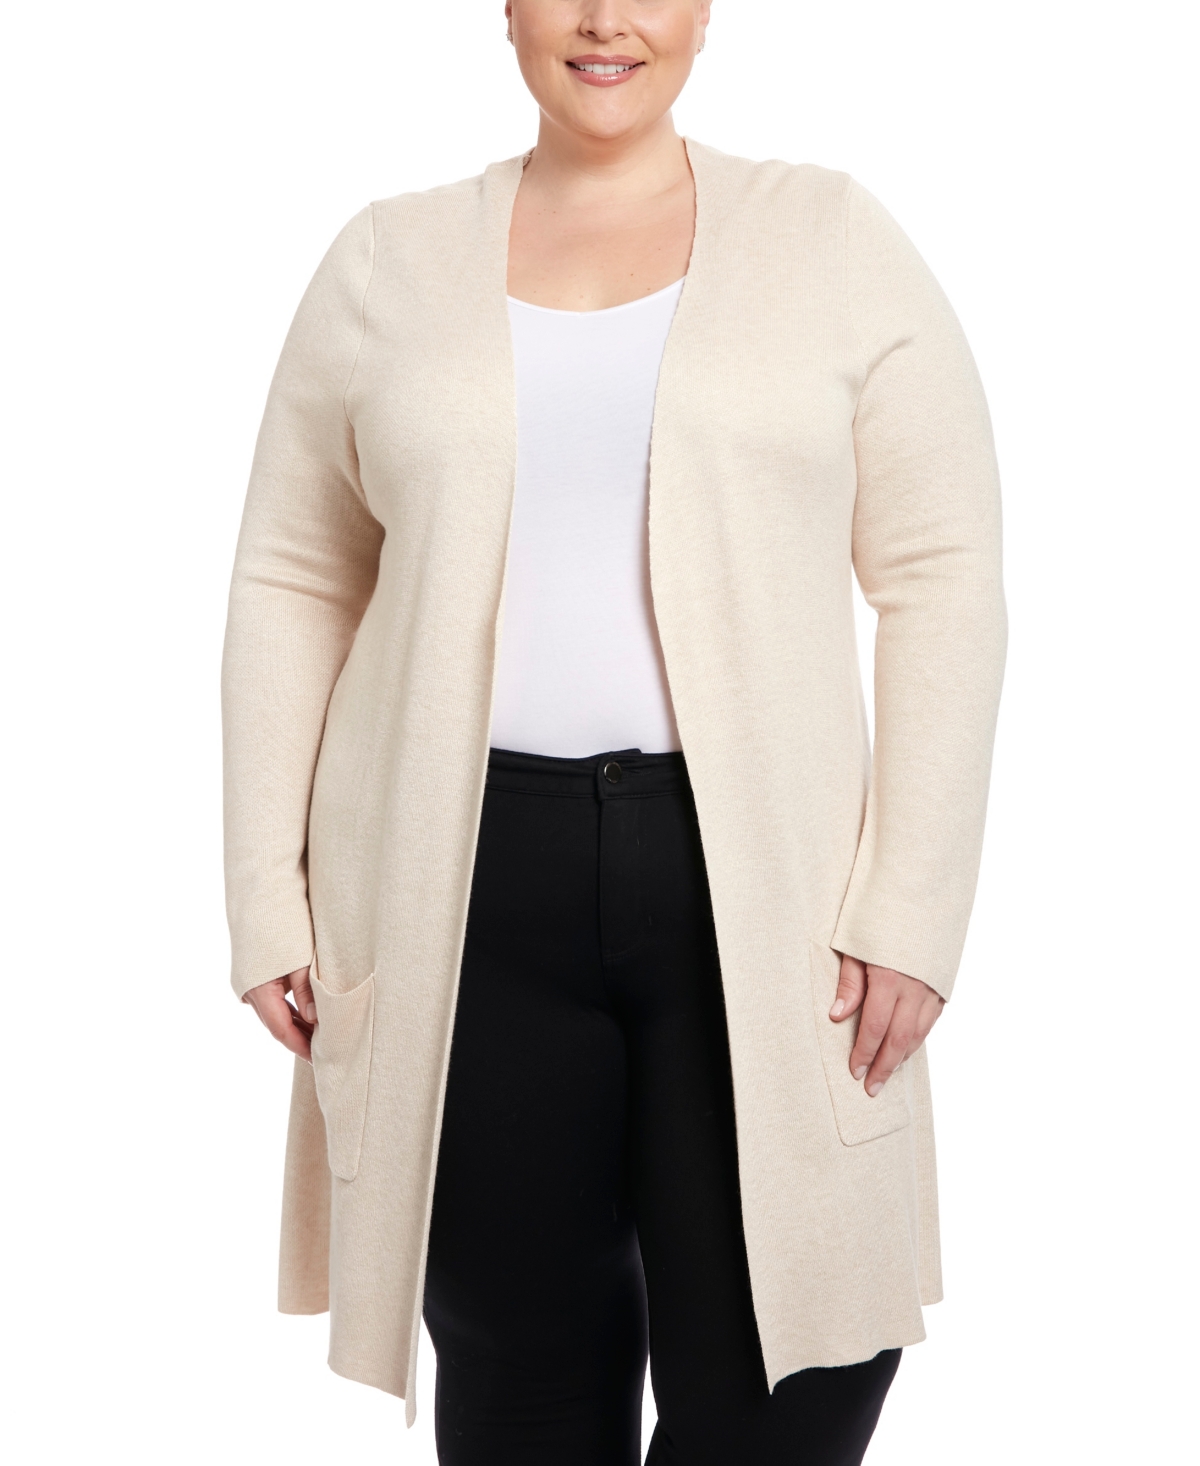 Joseph A Plus Size Open-Front Duster Cardigan Sweater